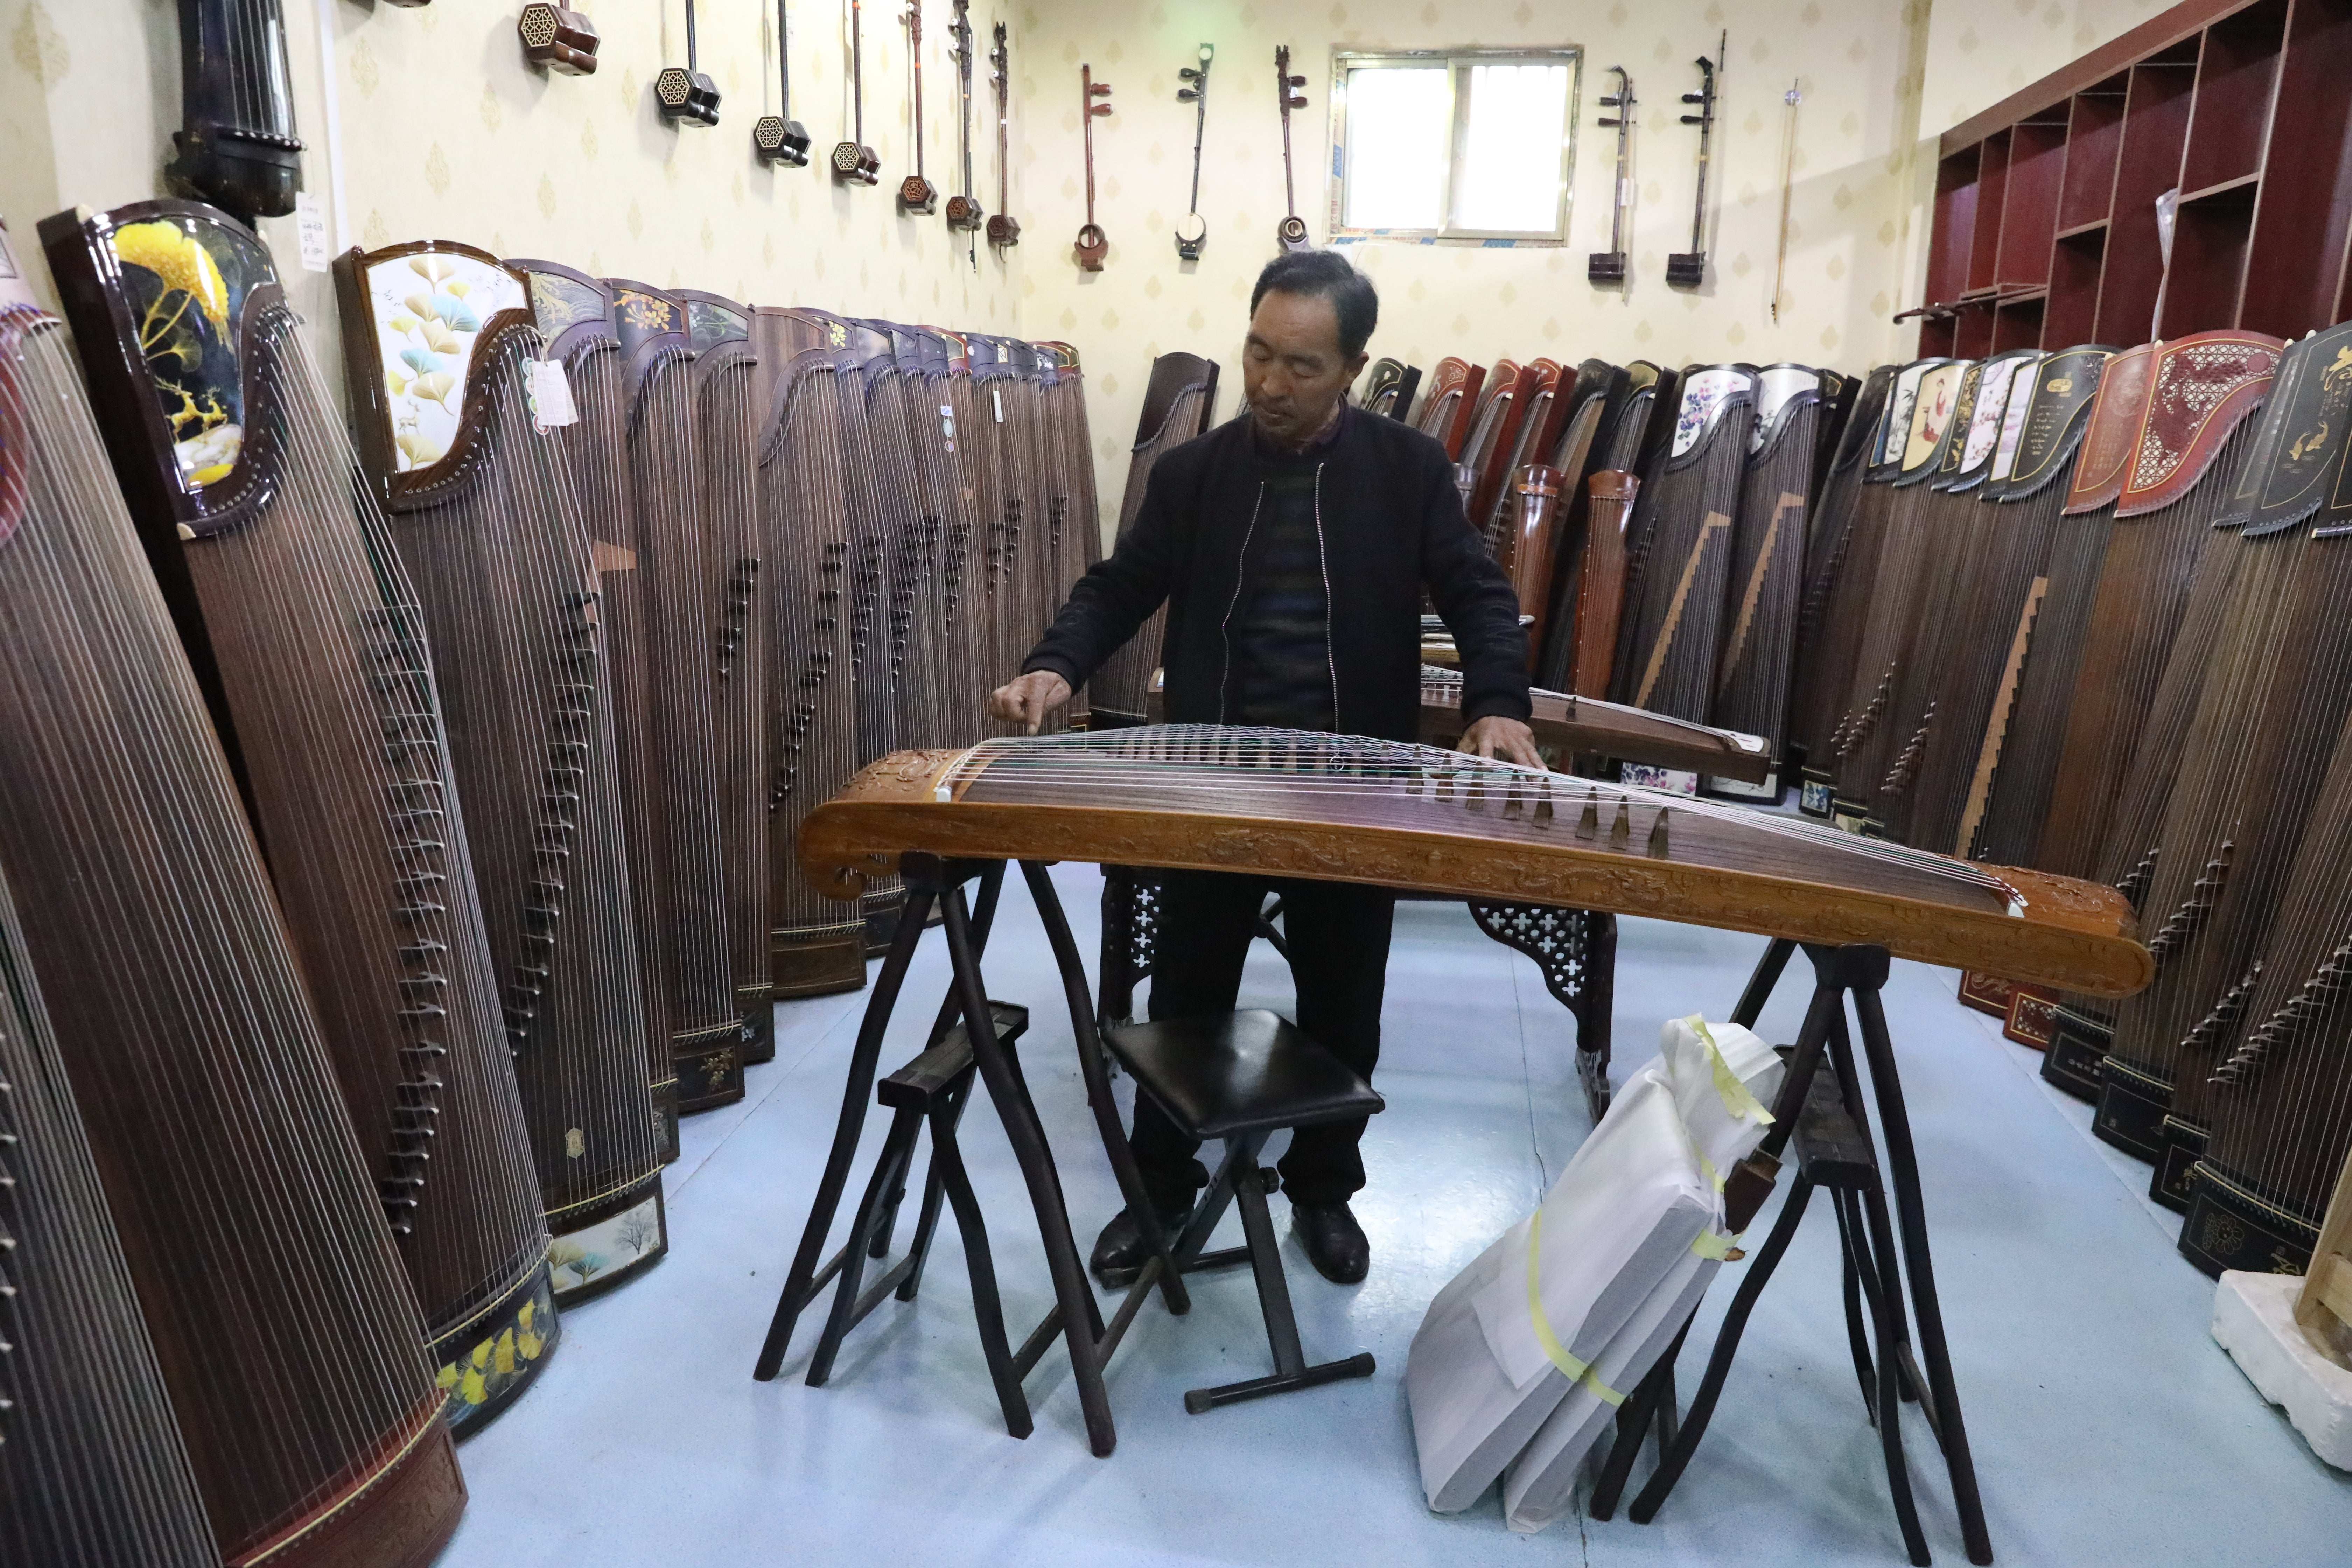 A villager plays the guzheng in Xuchang village, Lankao, Henan province